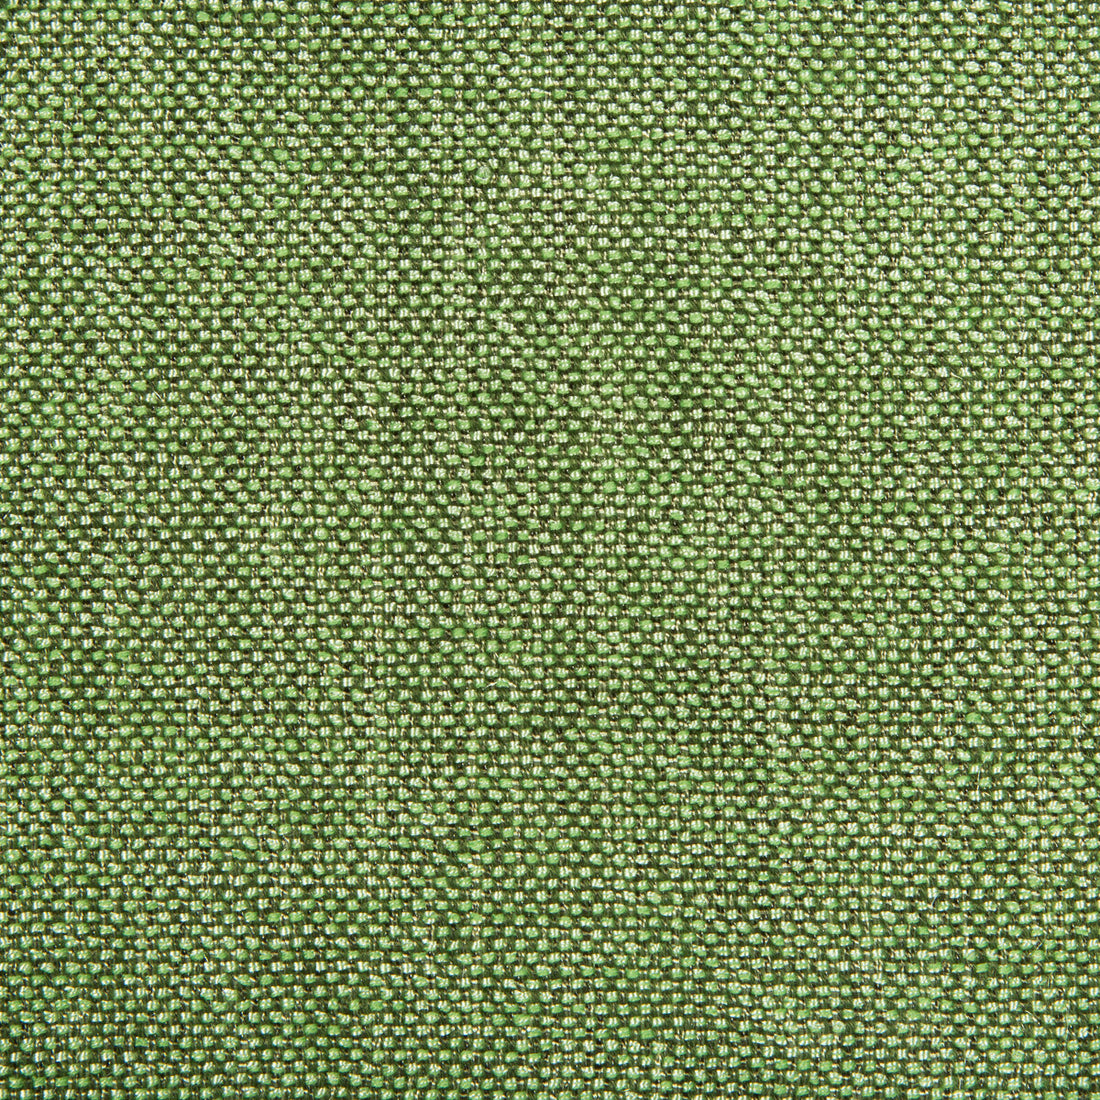 Kravet Contract fabric in 4458-323 color - pattern 4458.323.0 - by Kravet Contract